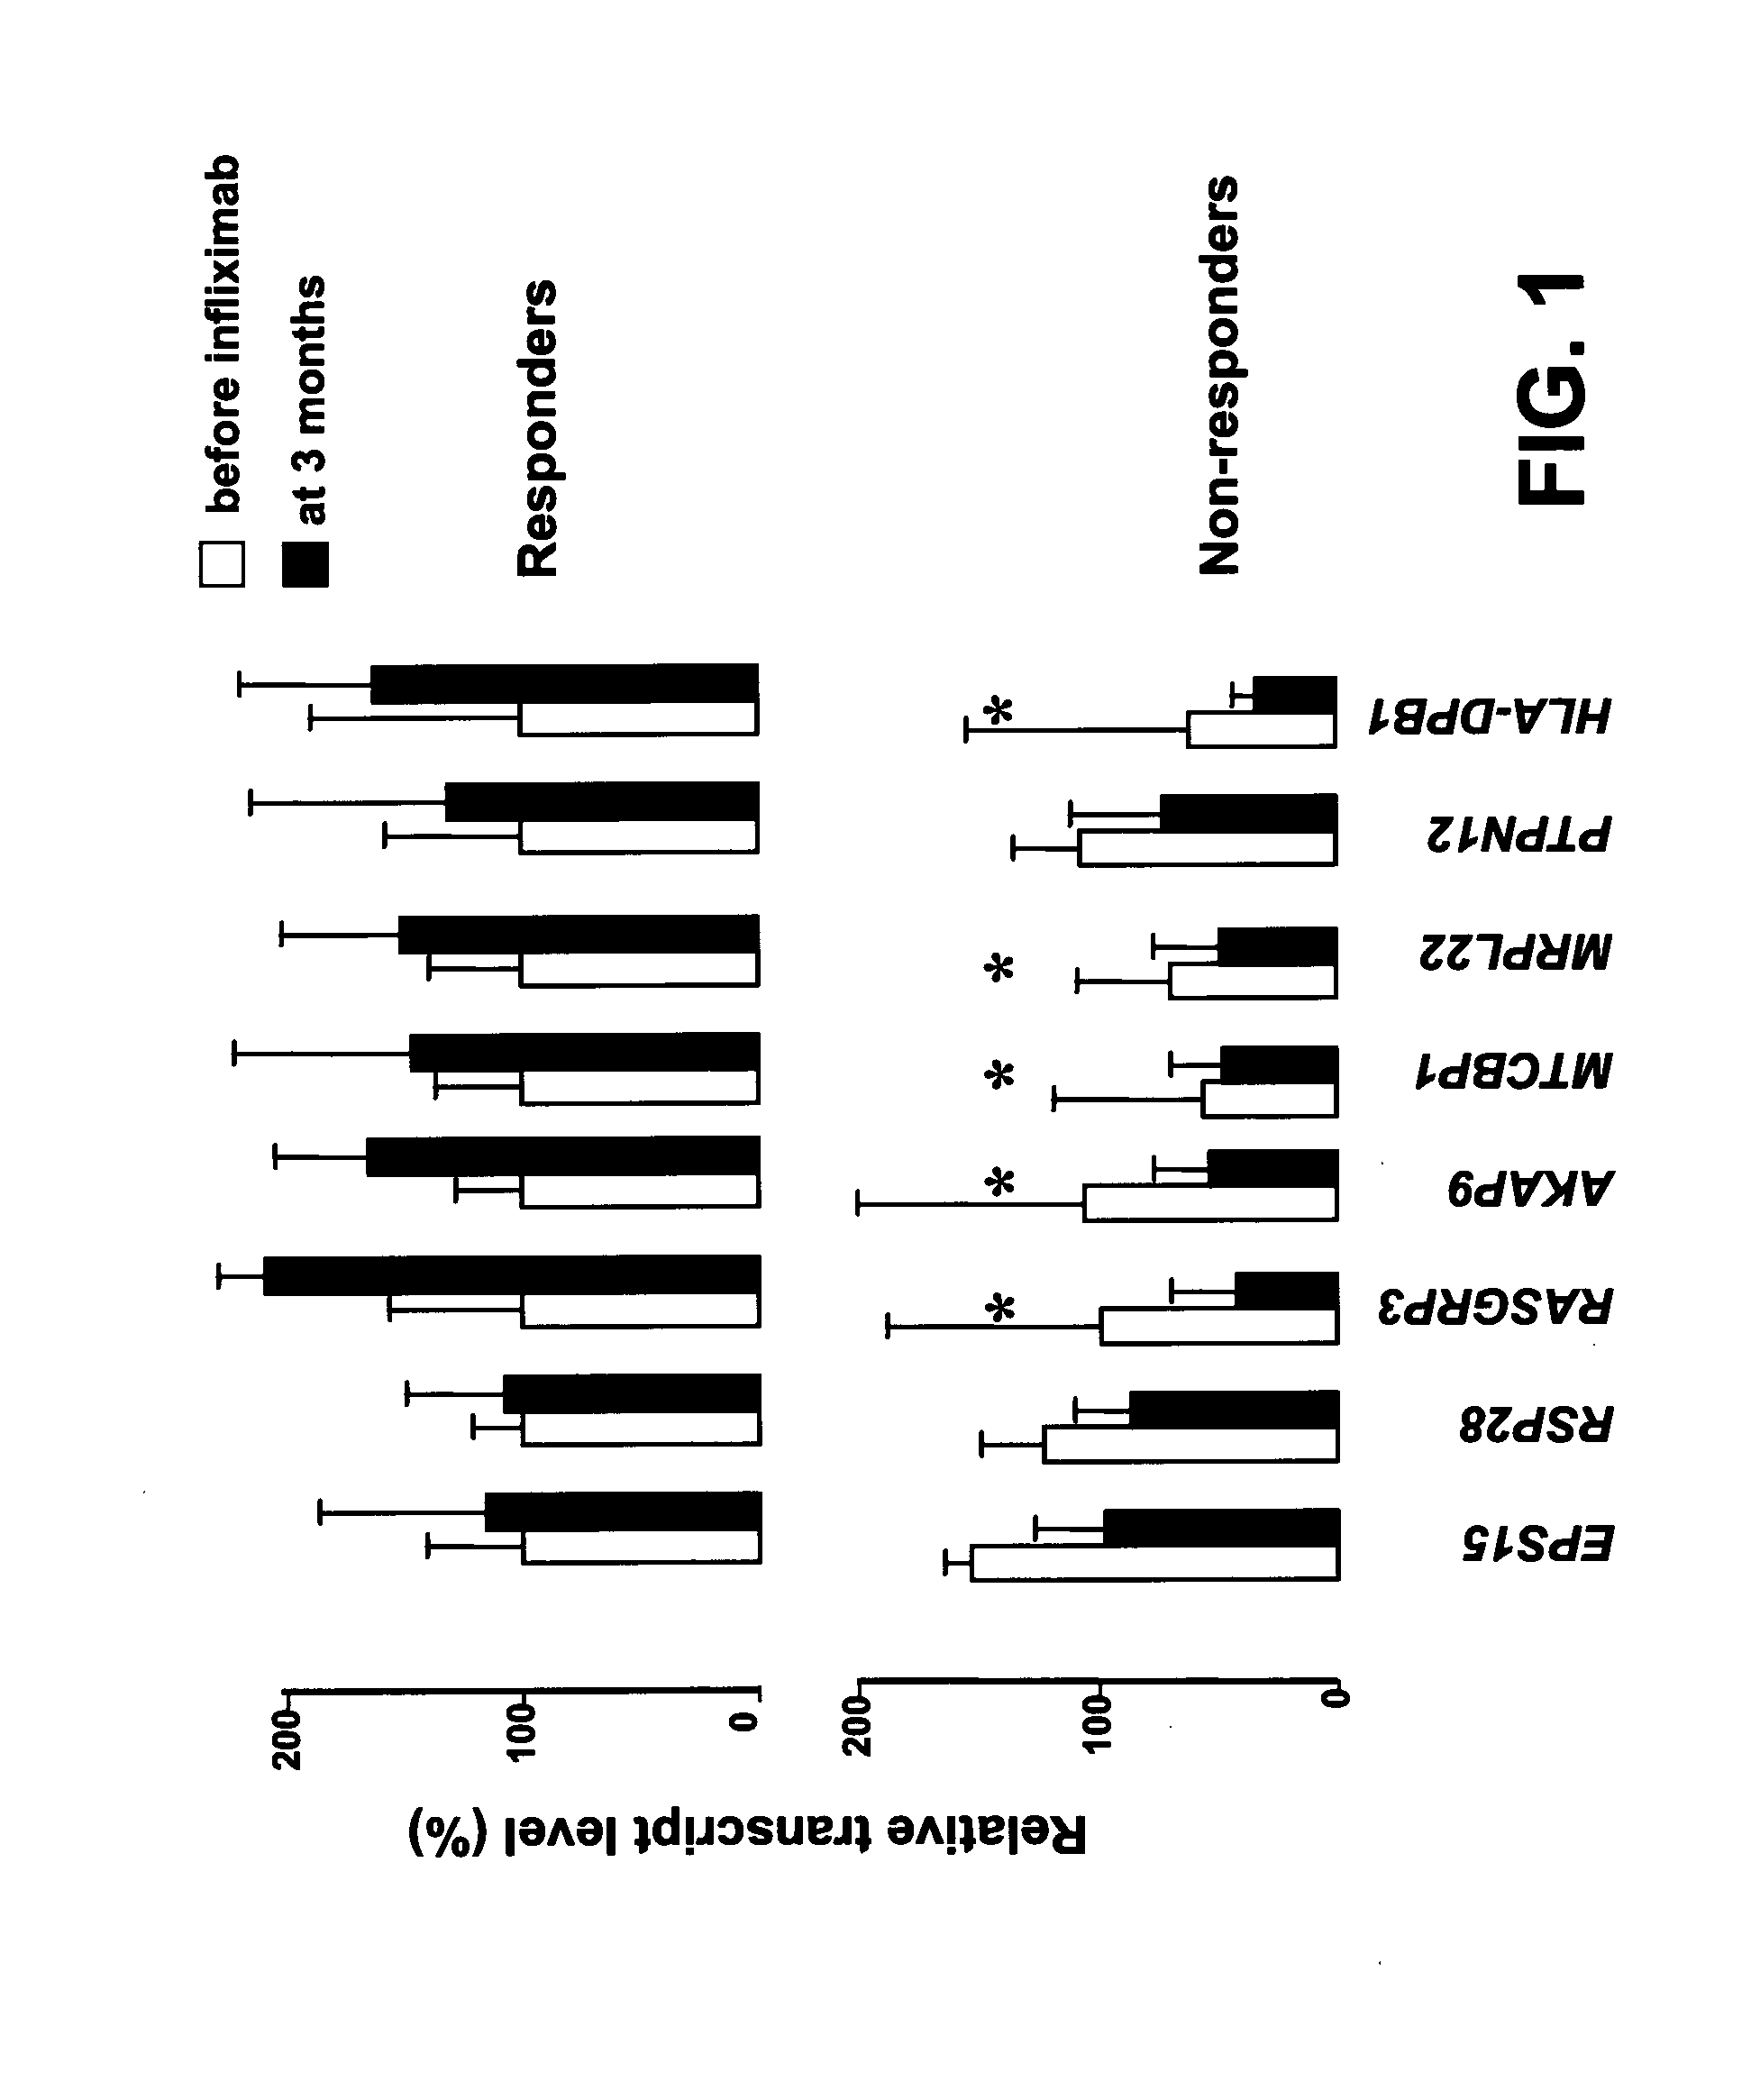 Method for Predicting Responsiveness to TNF Alpha Blocking Agents